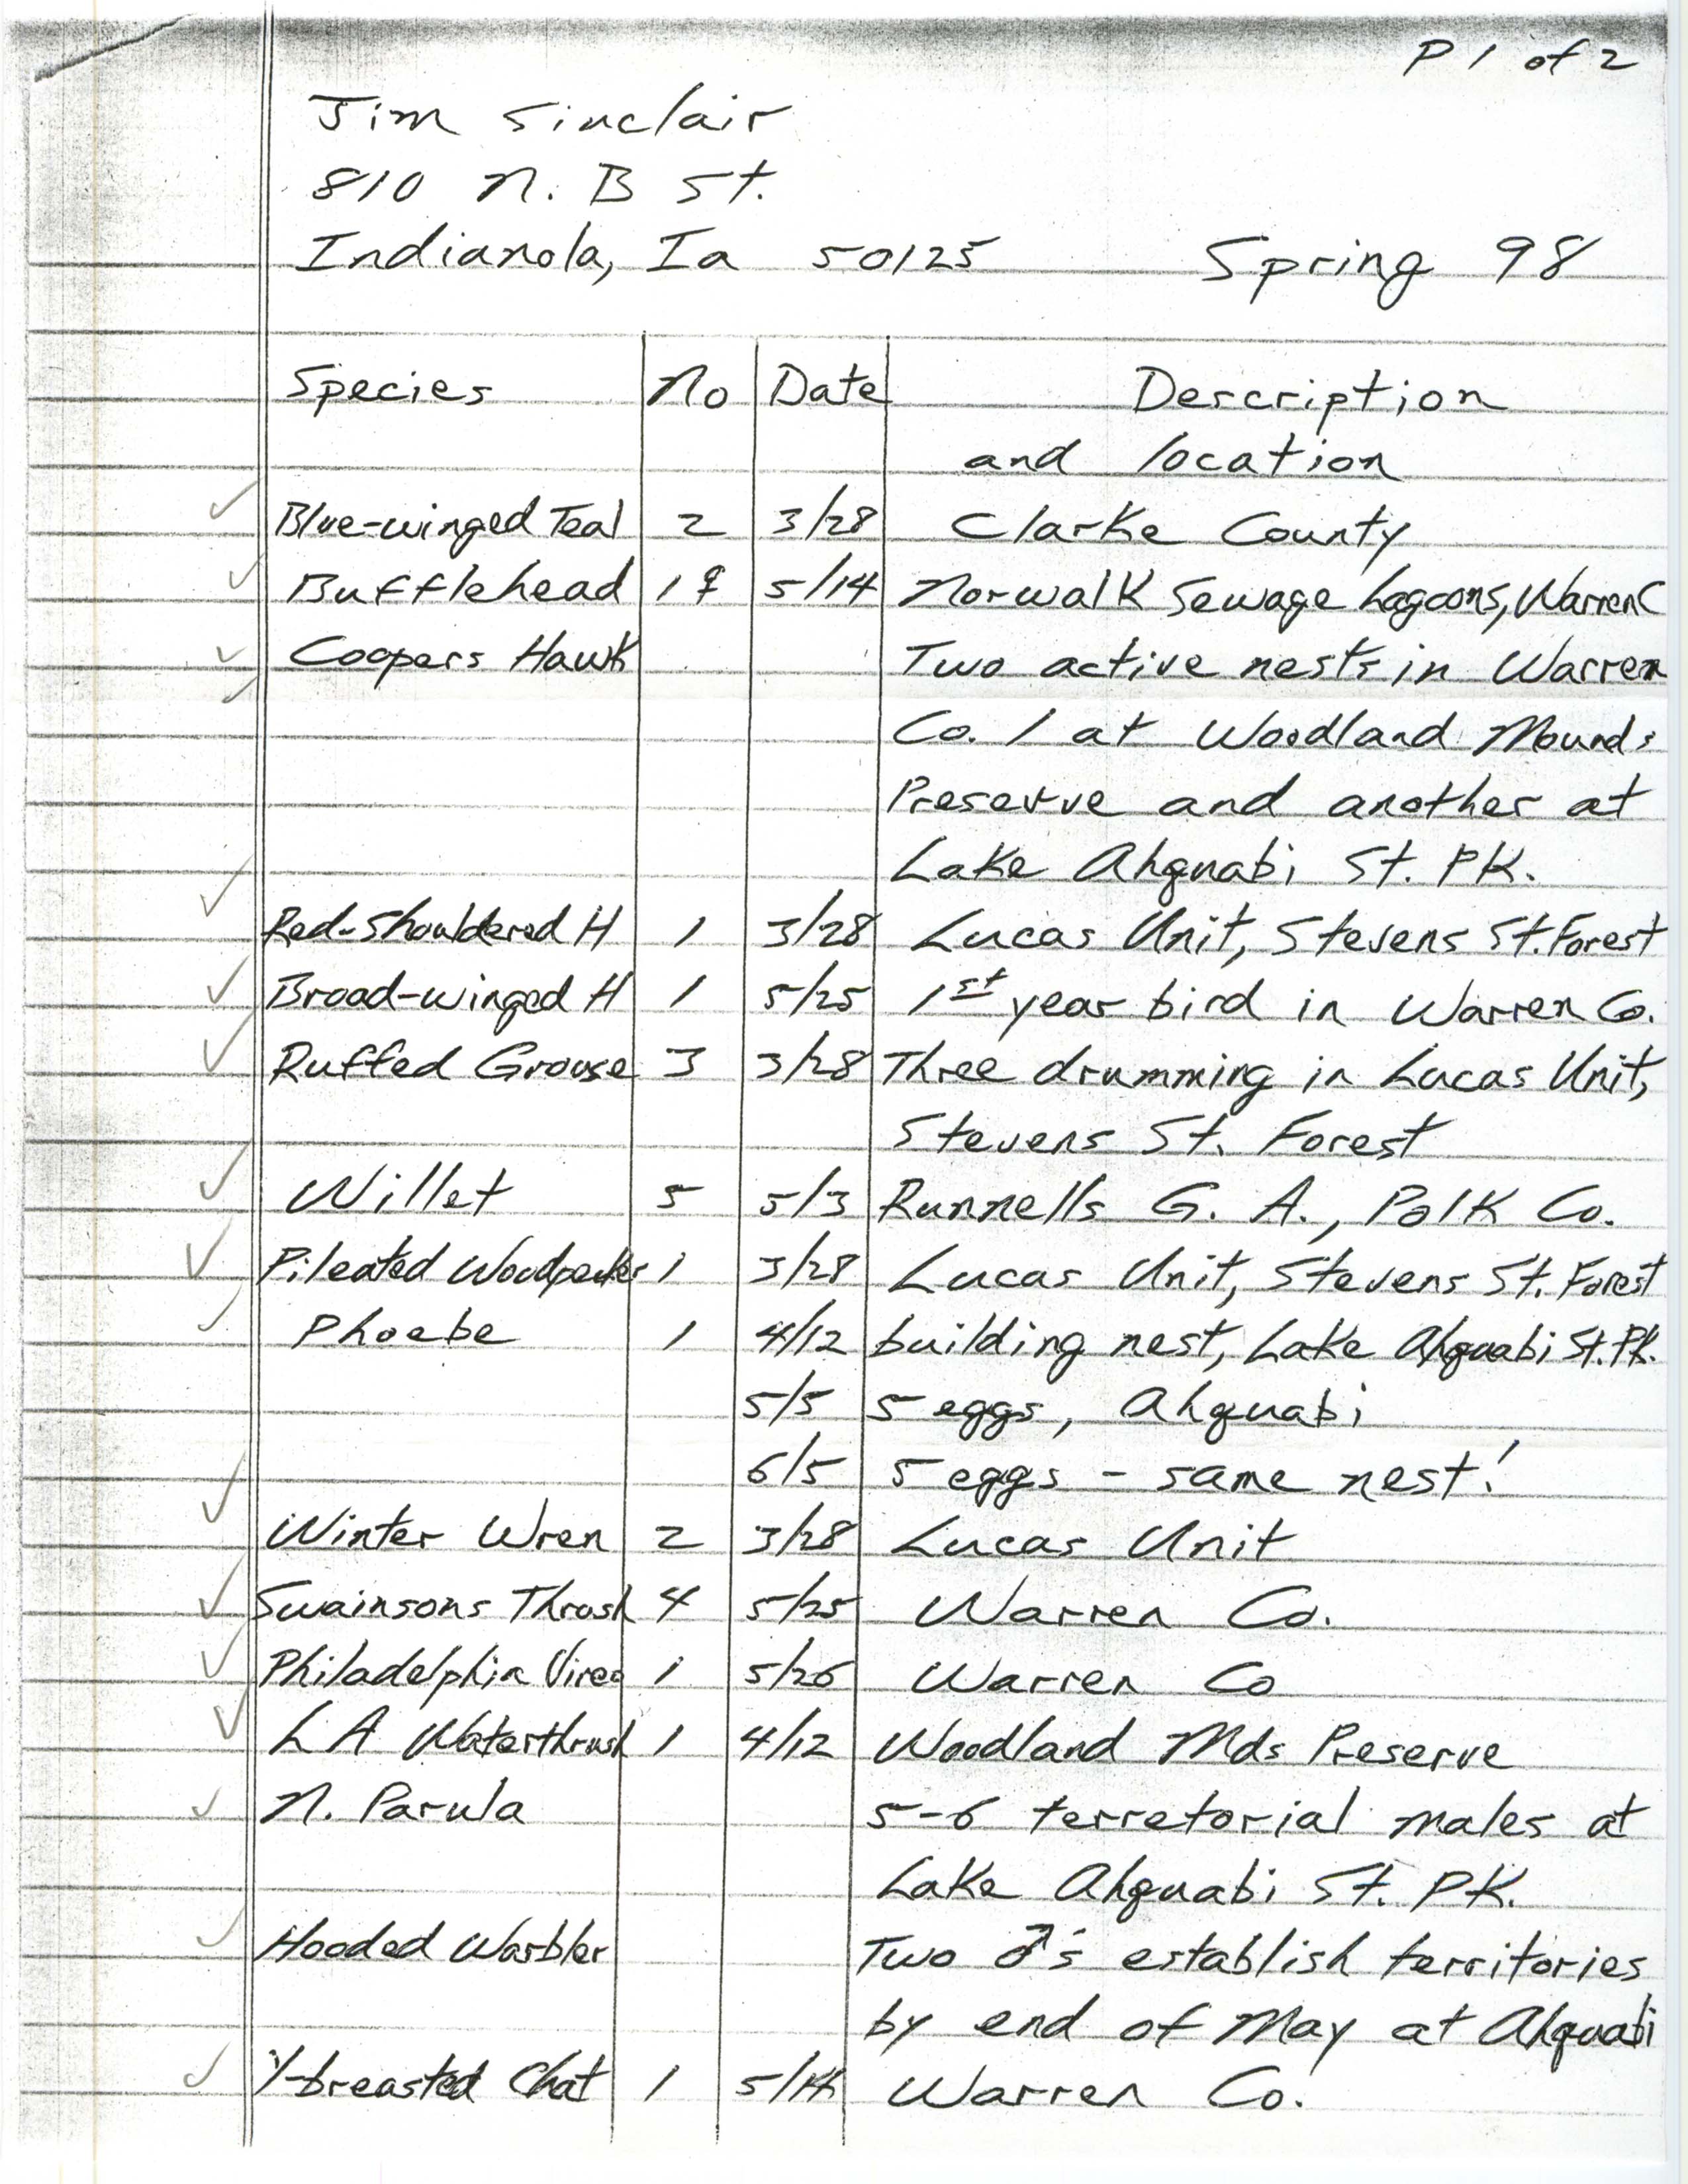 Annotated bird sighting list for spring 1998 compiled by Jim Sinclair